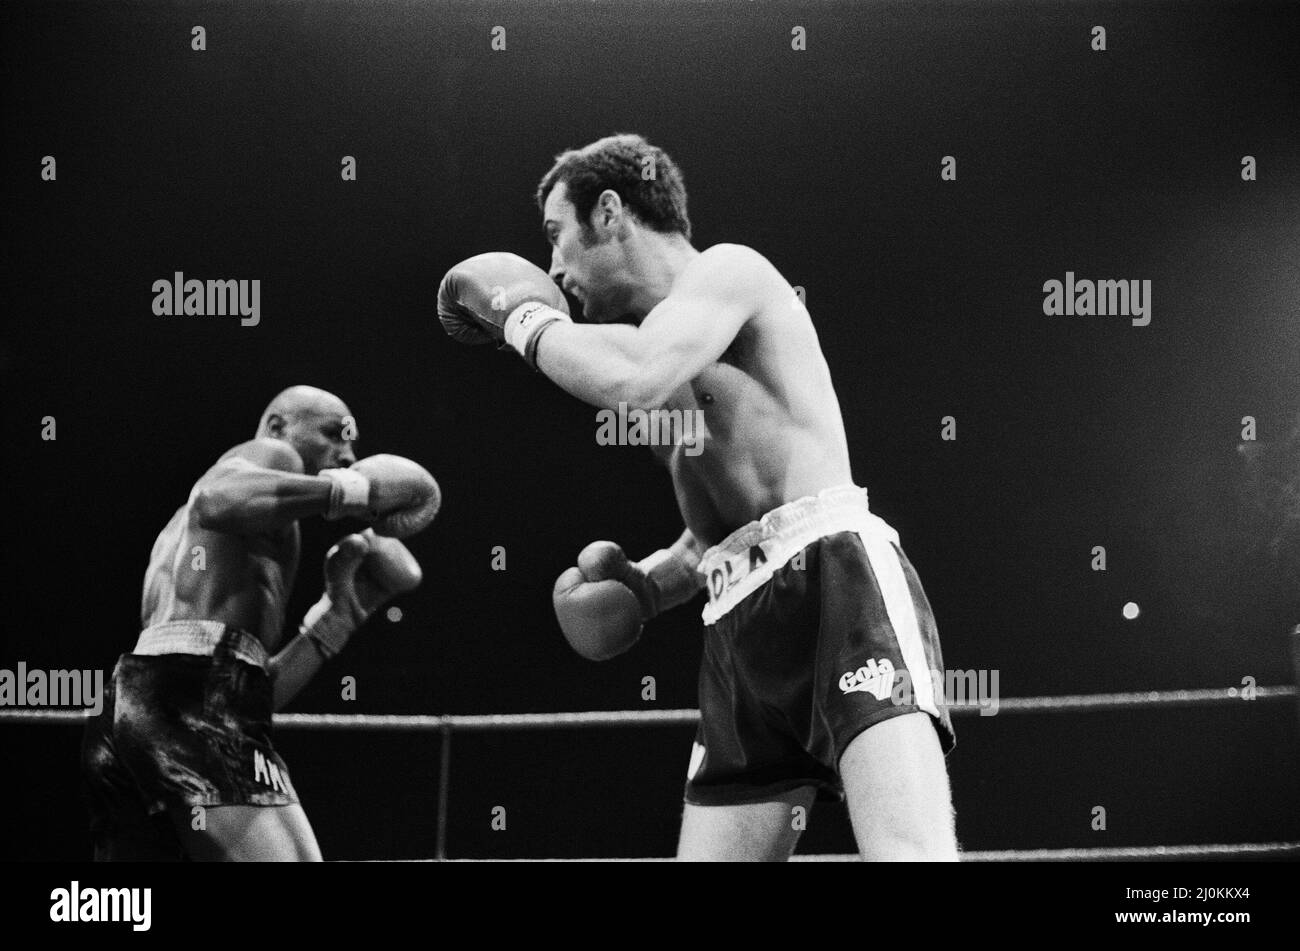 Alan Minter vs. Marvin Hagler, WBA and WBC world middleweight title fight, Wembley Arena, London, England.This was a grudge match in which Hagler won by TKO in the third round. Hagler went six years undefeated before losing his titles to Sugar Ray Leonard in 1987. (Picture Shows) Fight action. 27th September 1980 Stock Photo